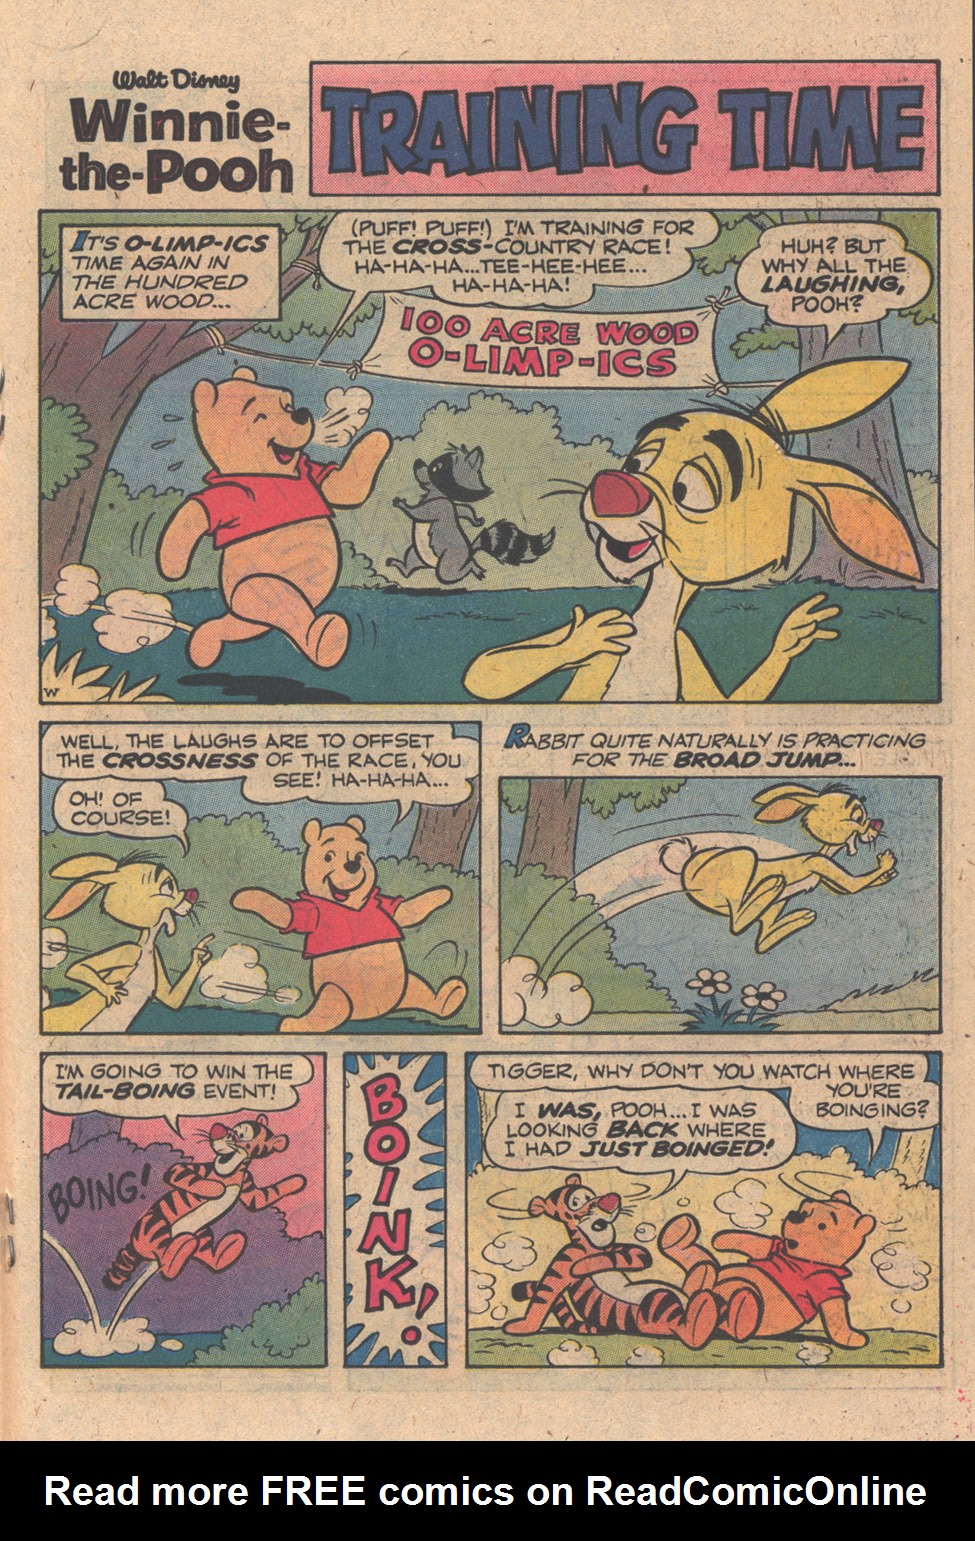 Read online Winnie-the-Pooh comic -  Issue #13 - 19